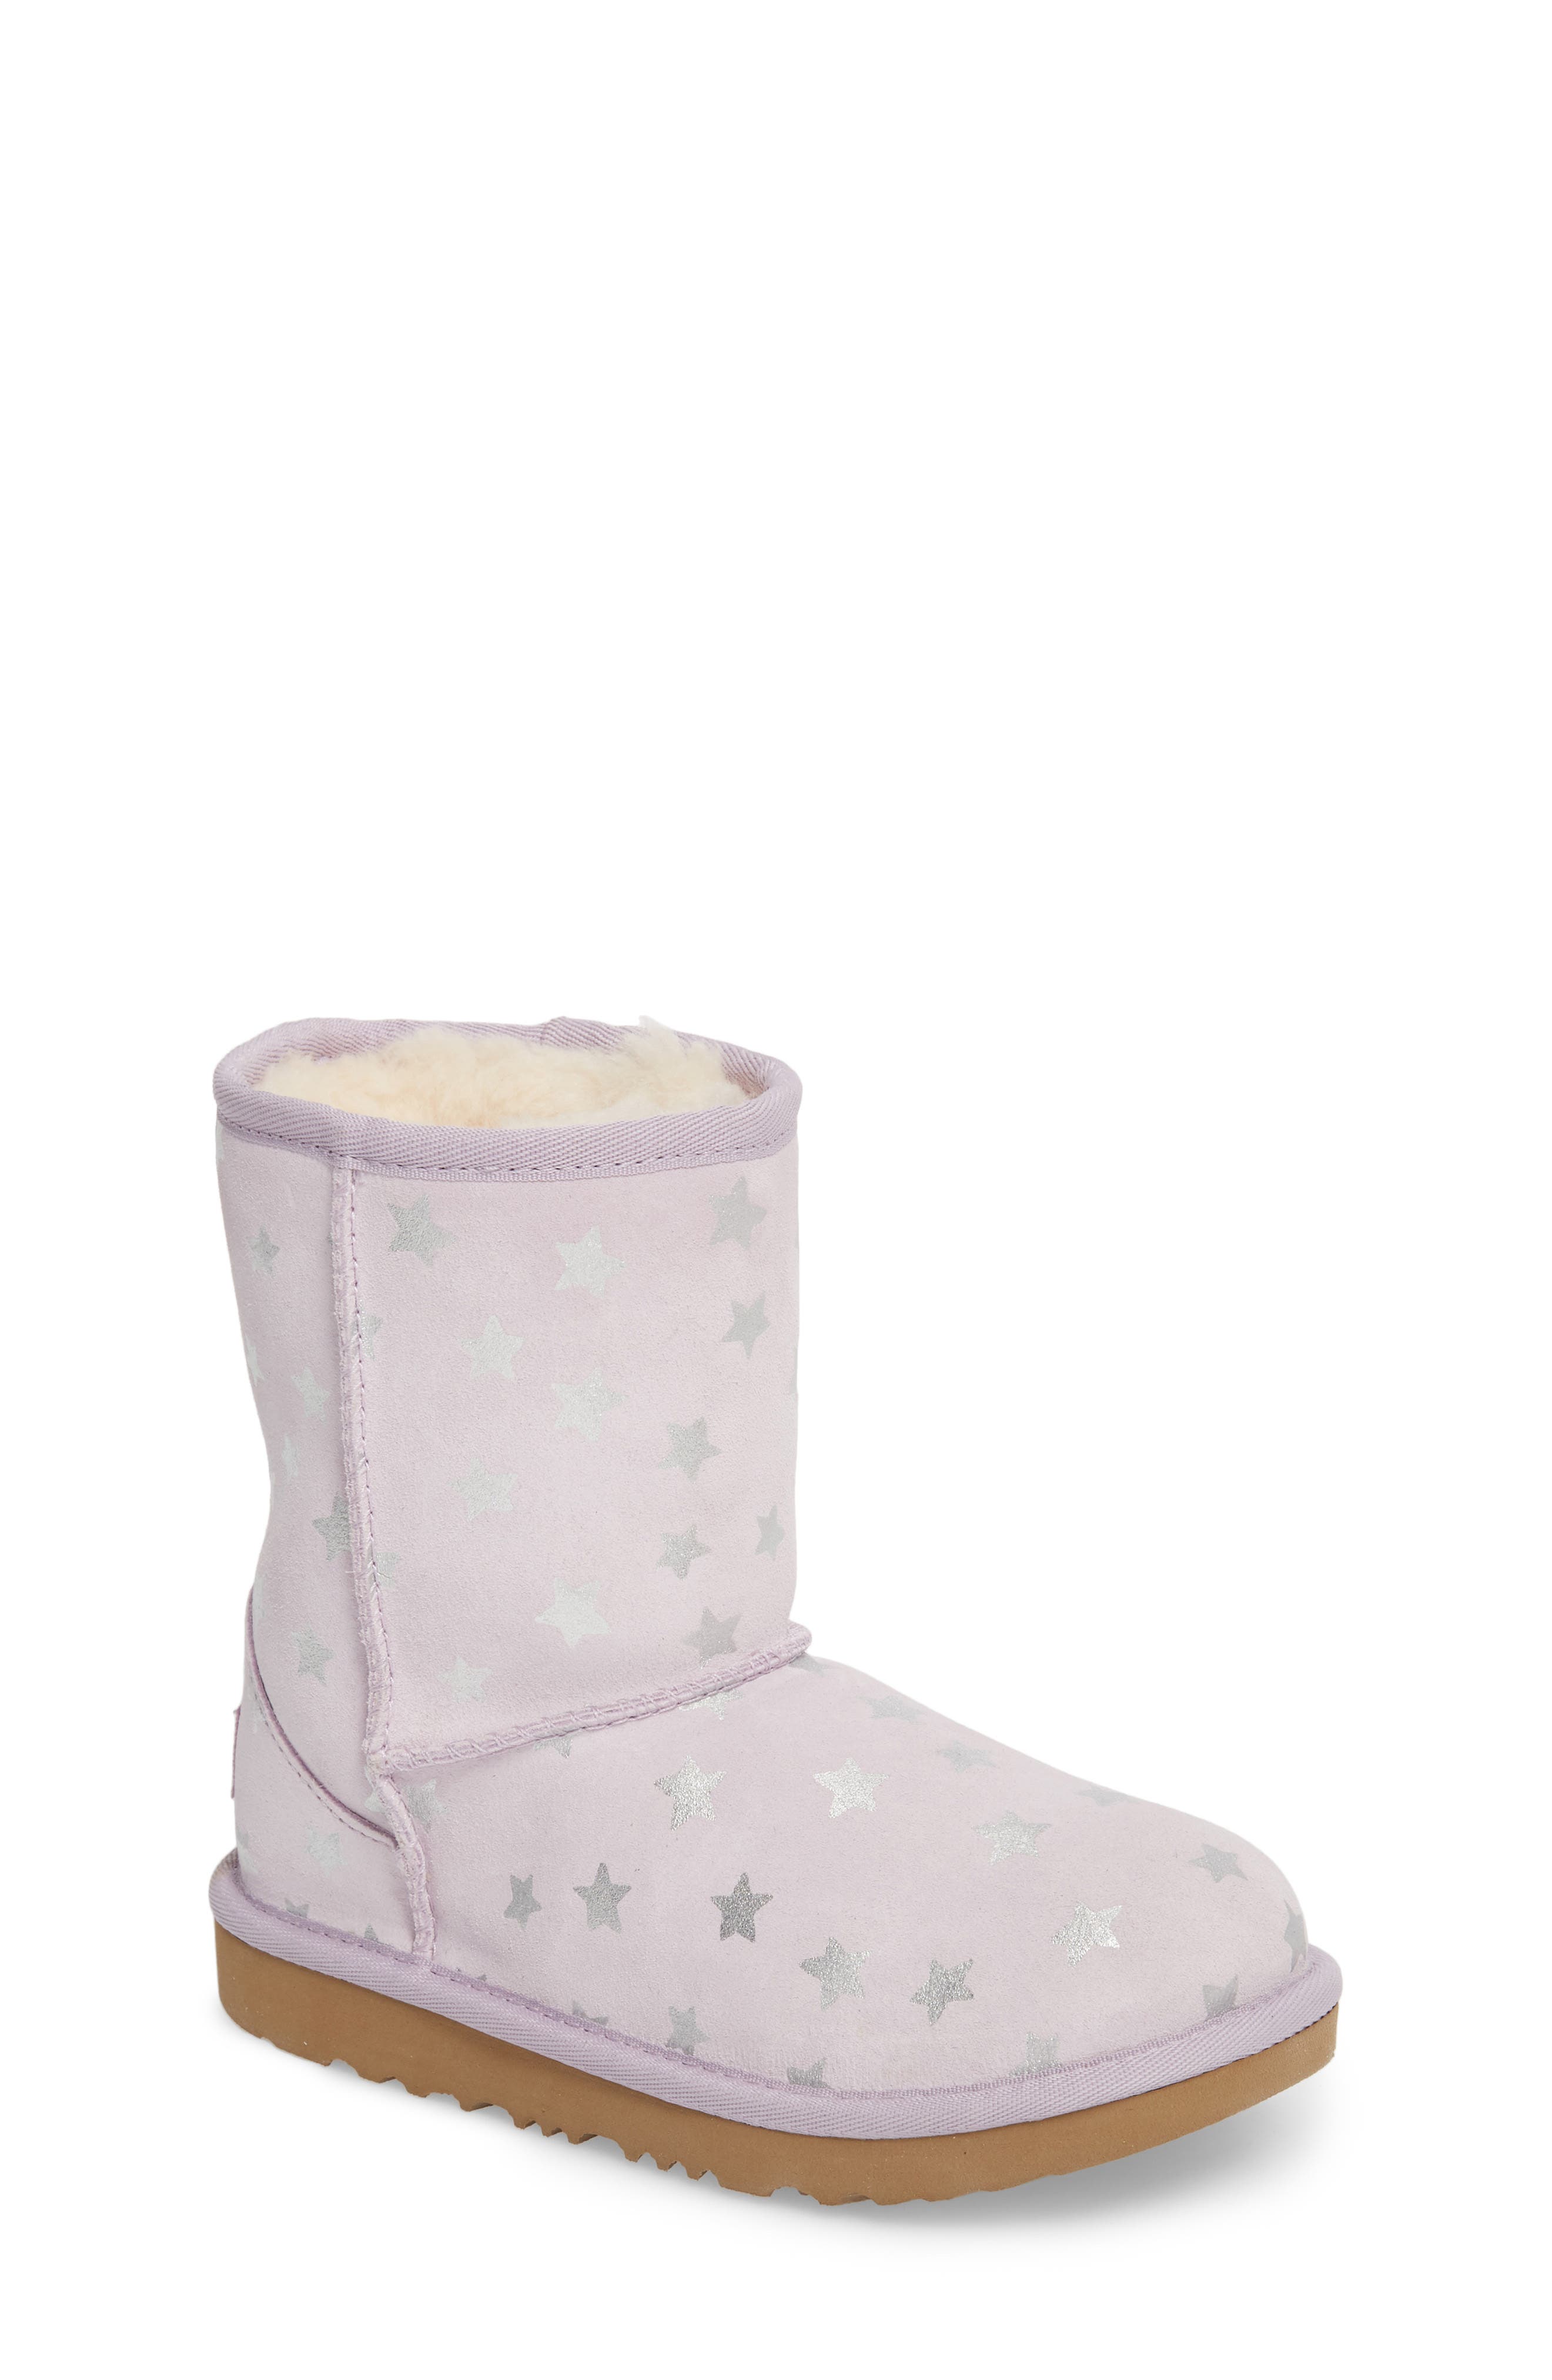 toddler uggs with stars